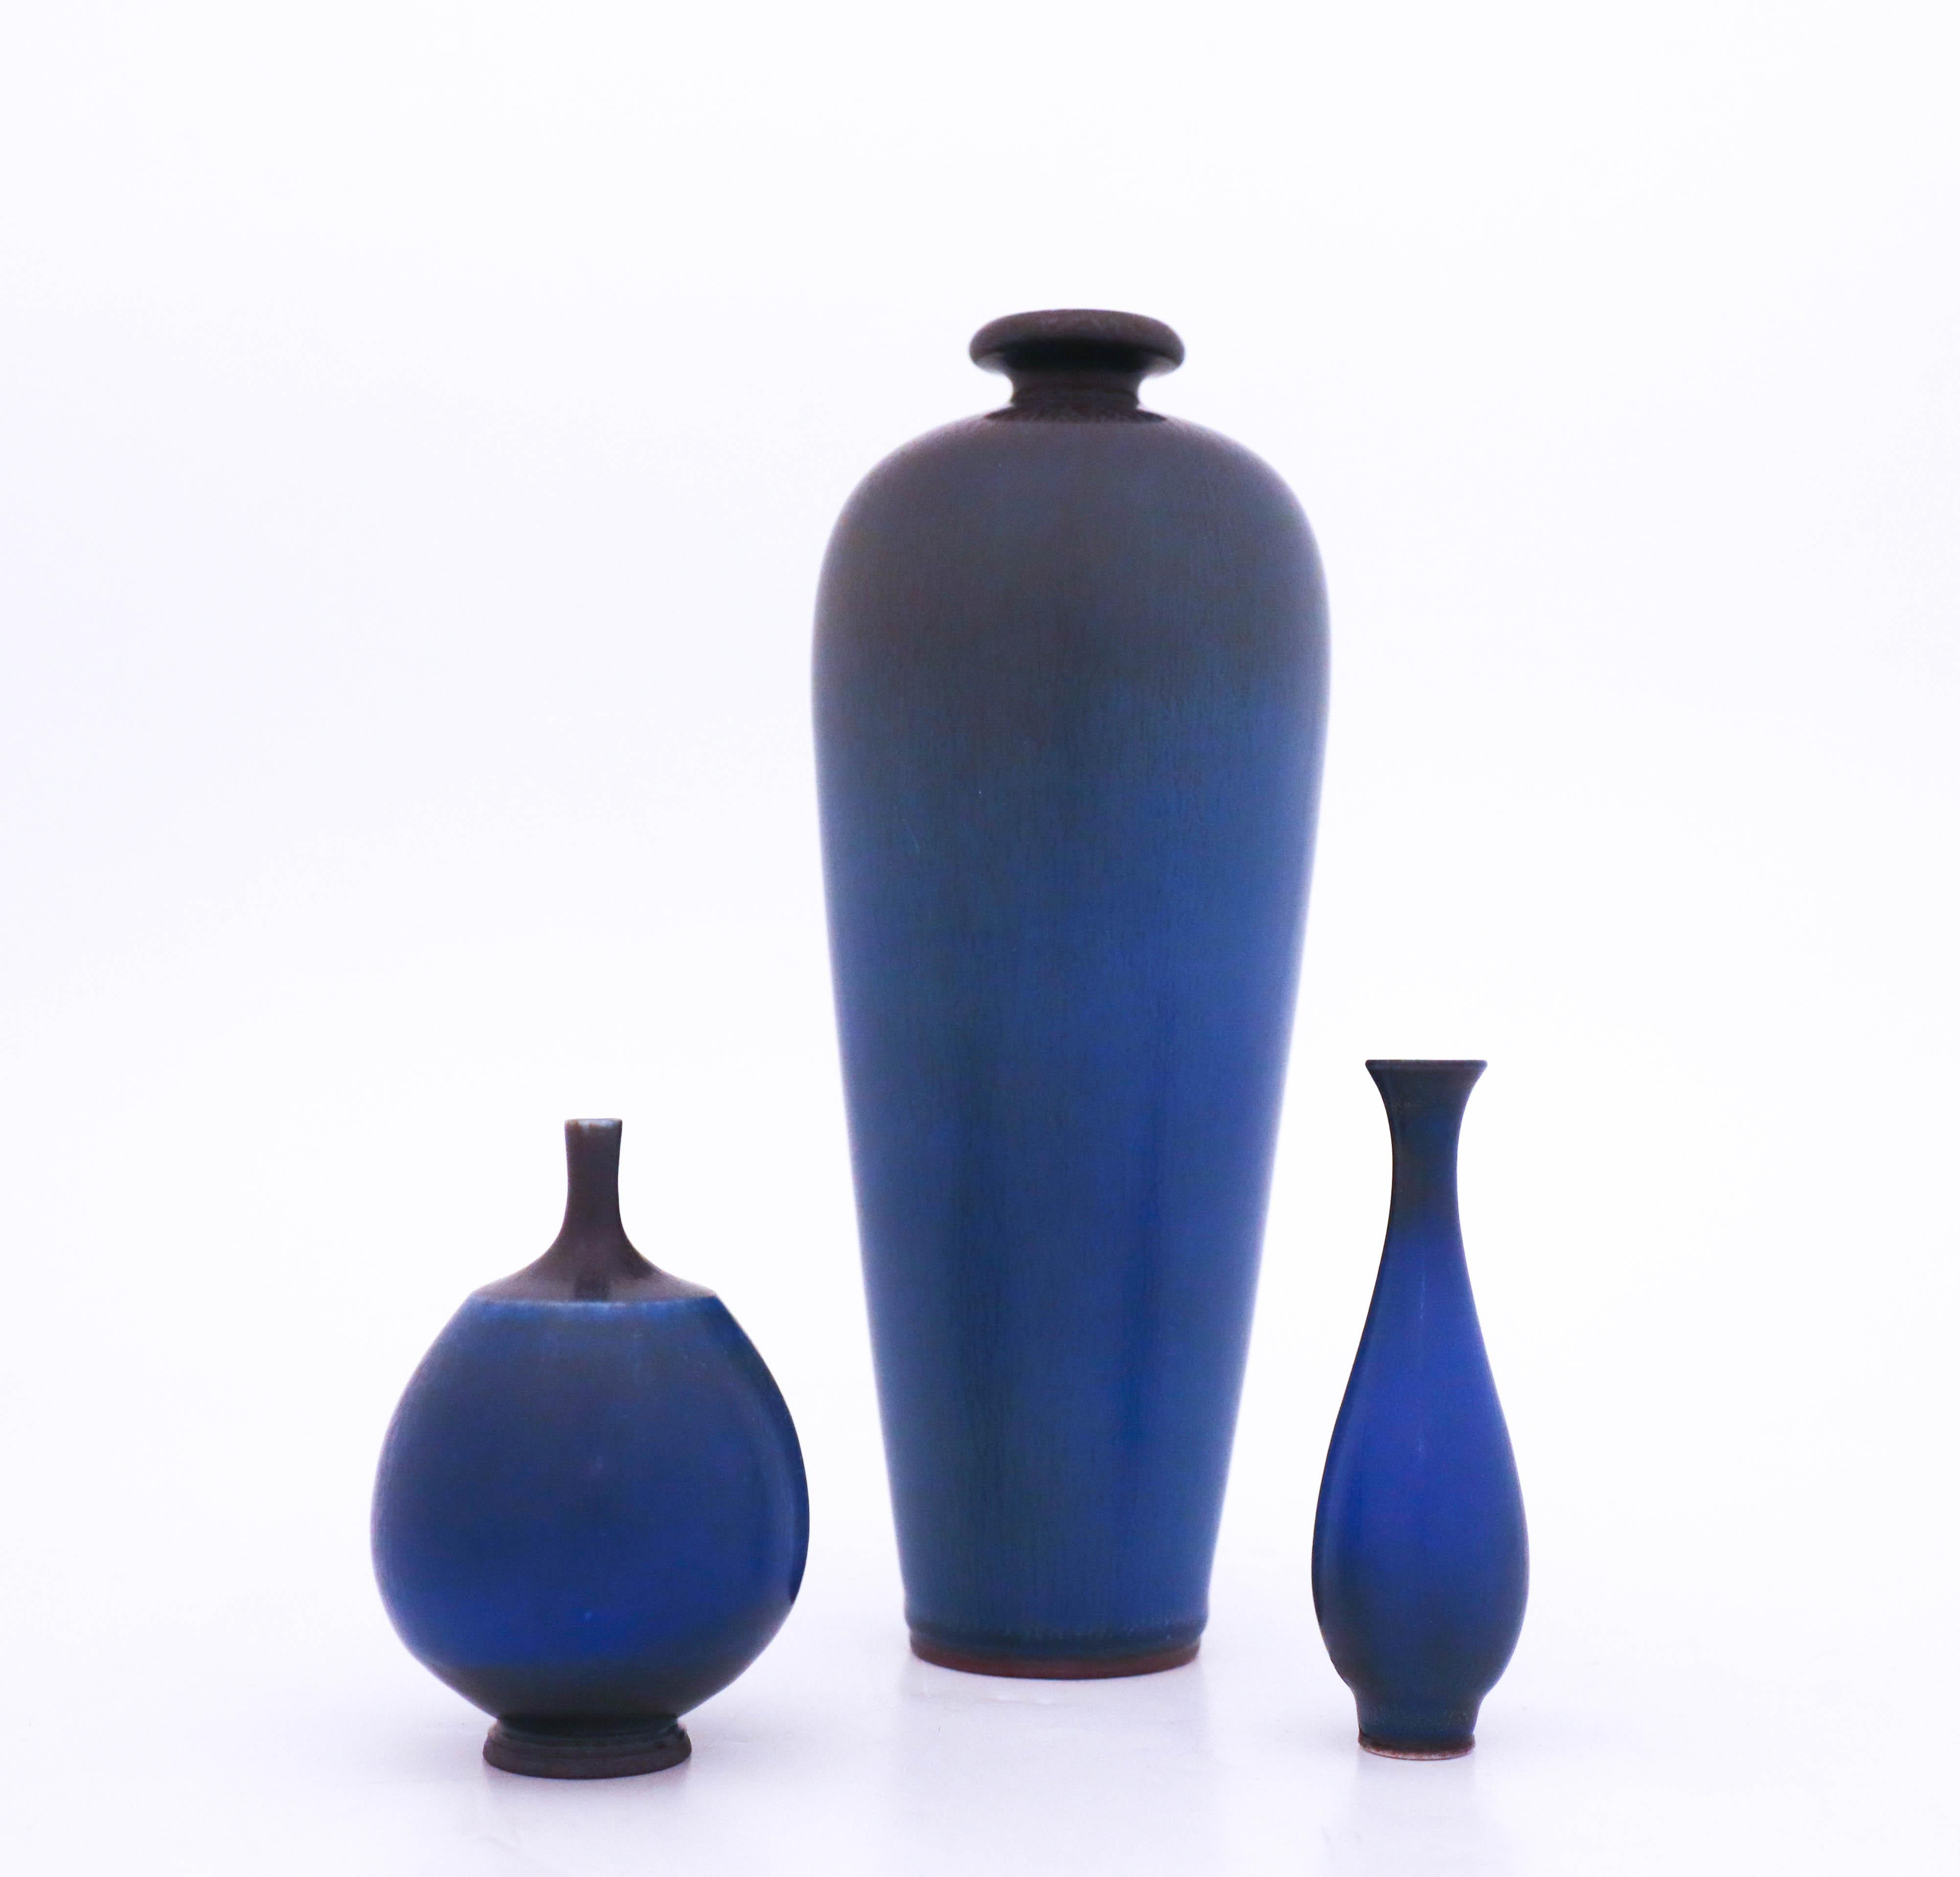 A group of three blue vases designed by Berndt Friberg from Gustavsberg. The vases are 21 cm, 10 cm and 9 cm. They are in very good condition.